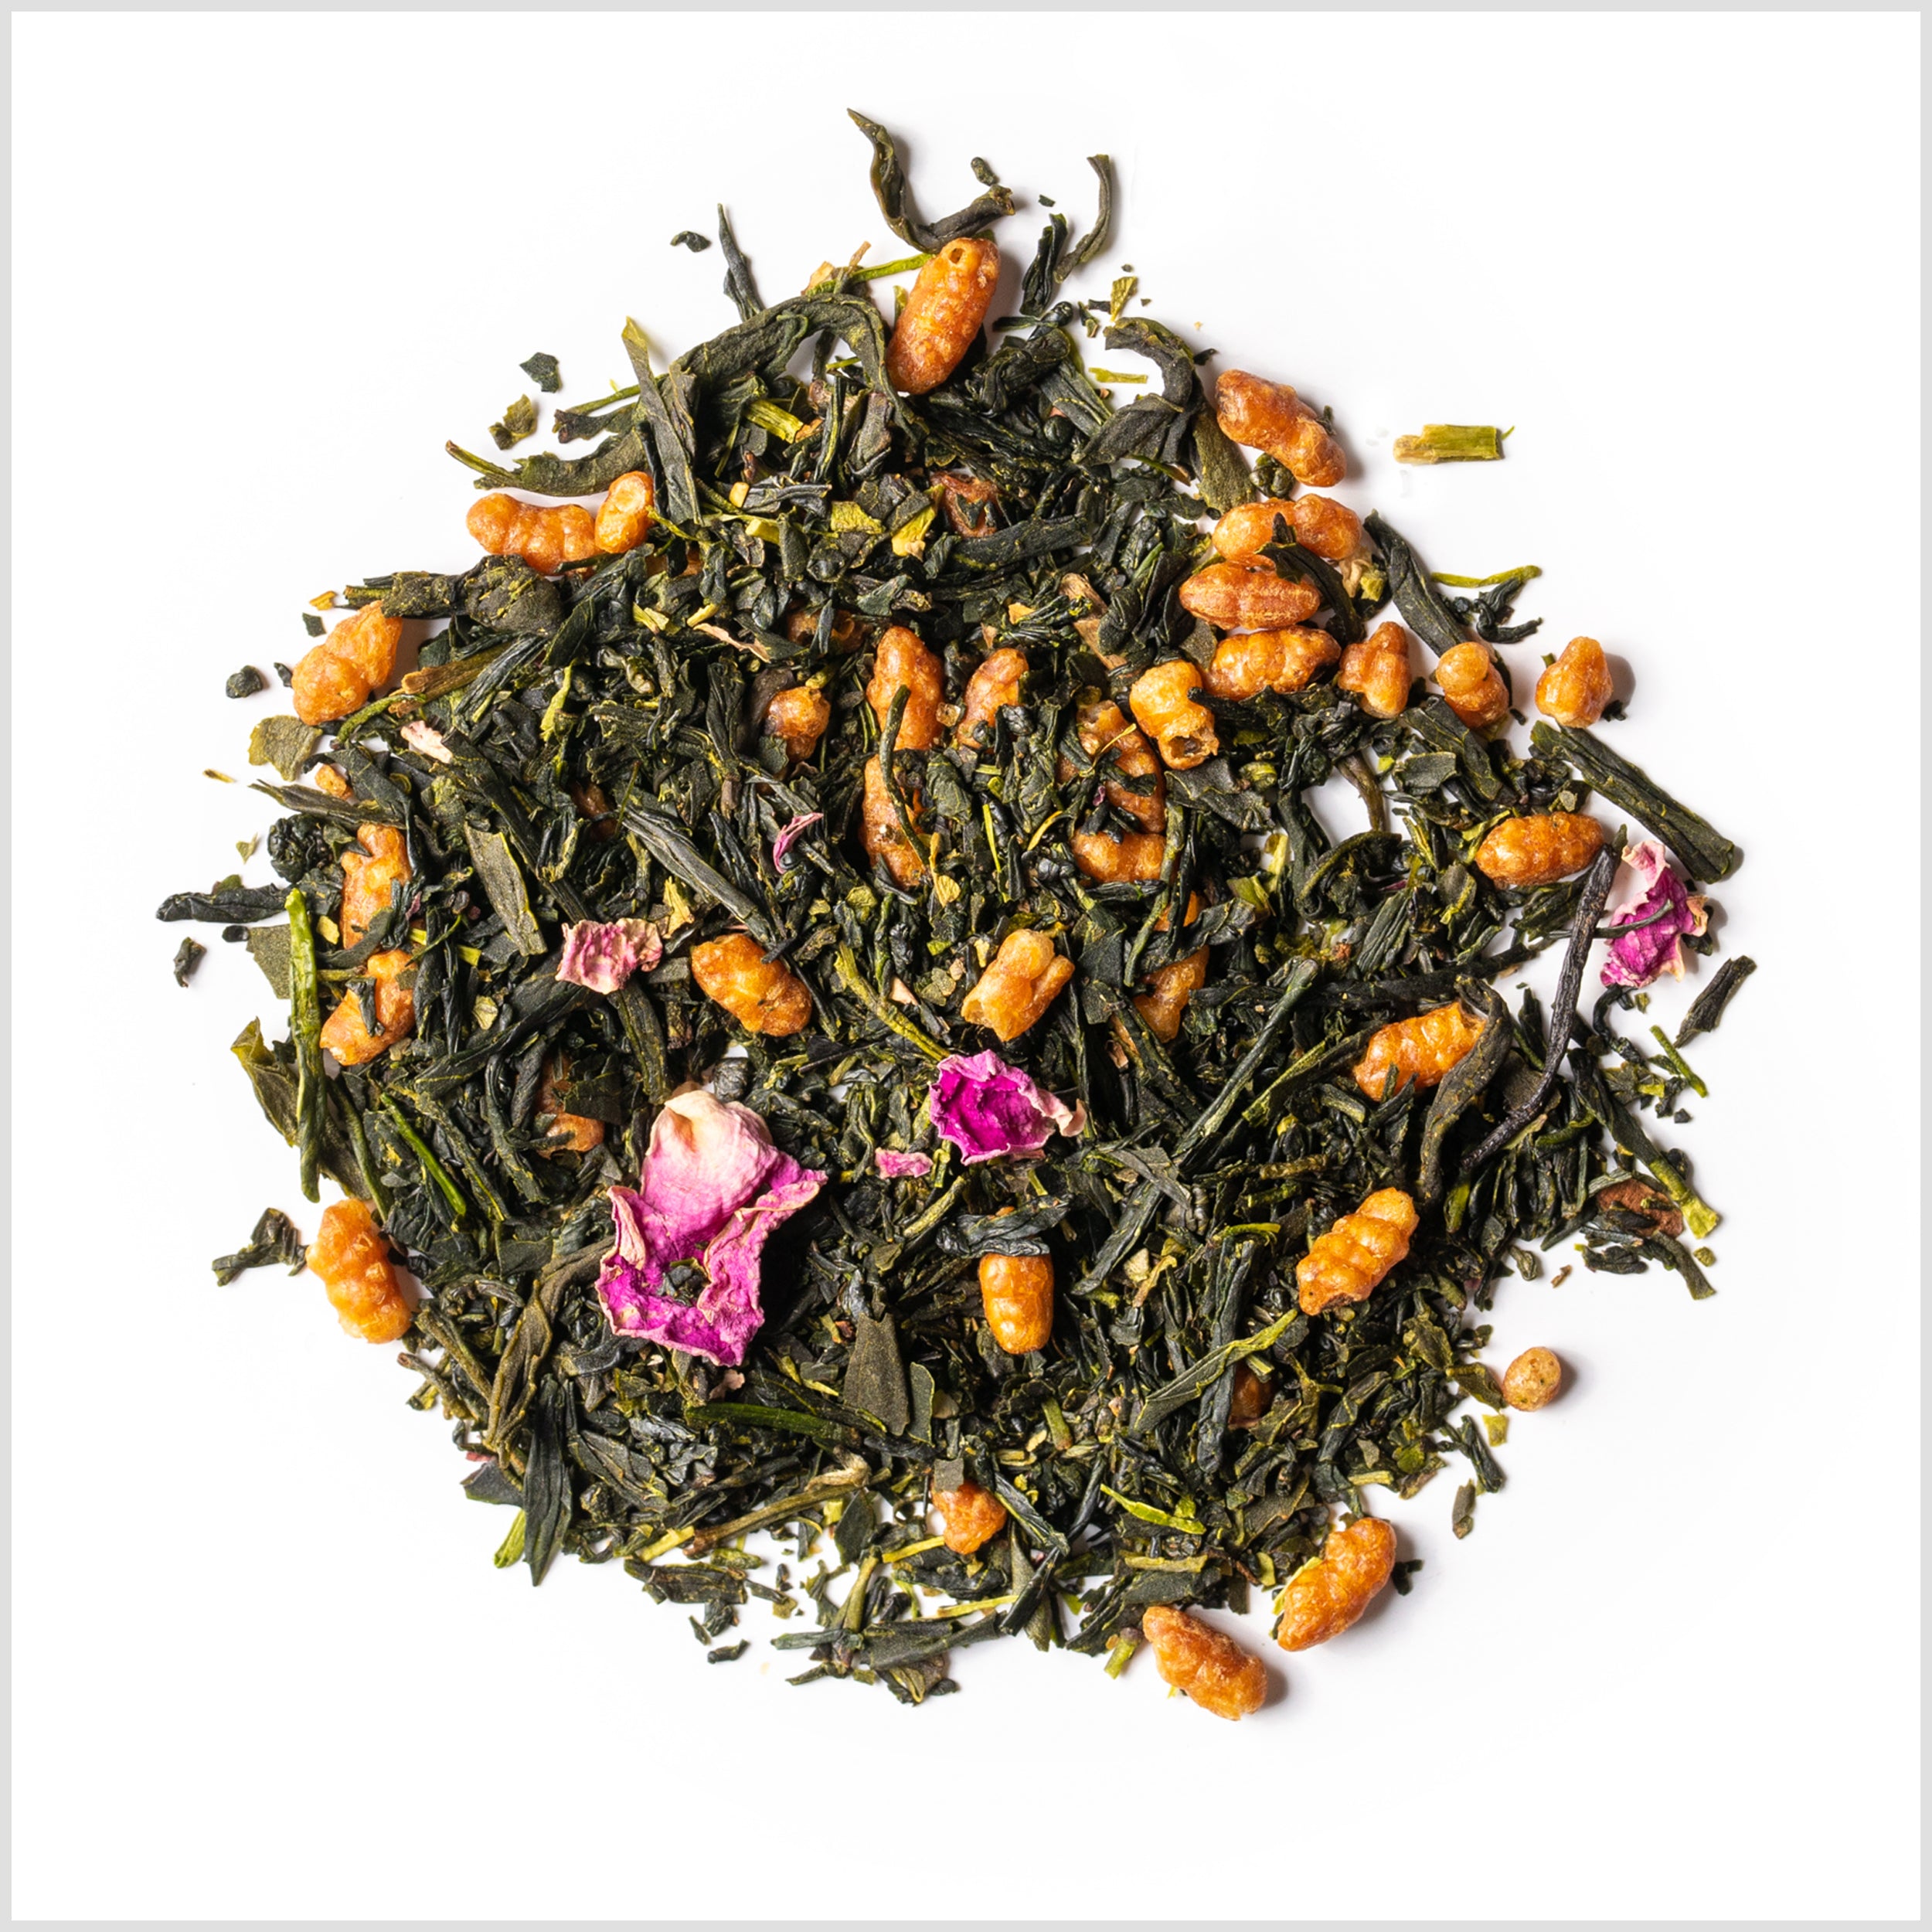 Circular pile of sencha full leaf tea with toasted genmai rice and pink rose petals.